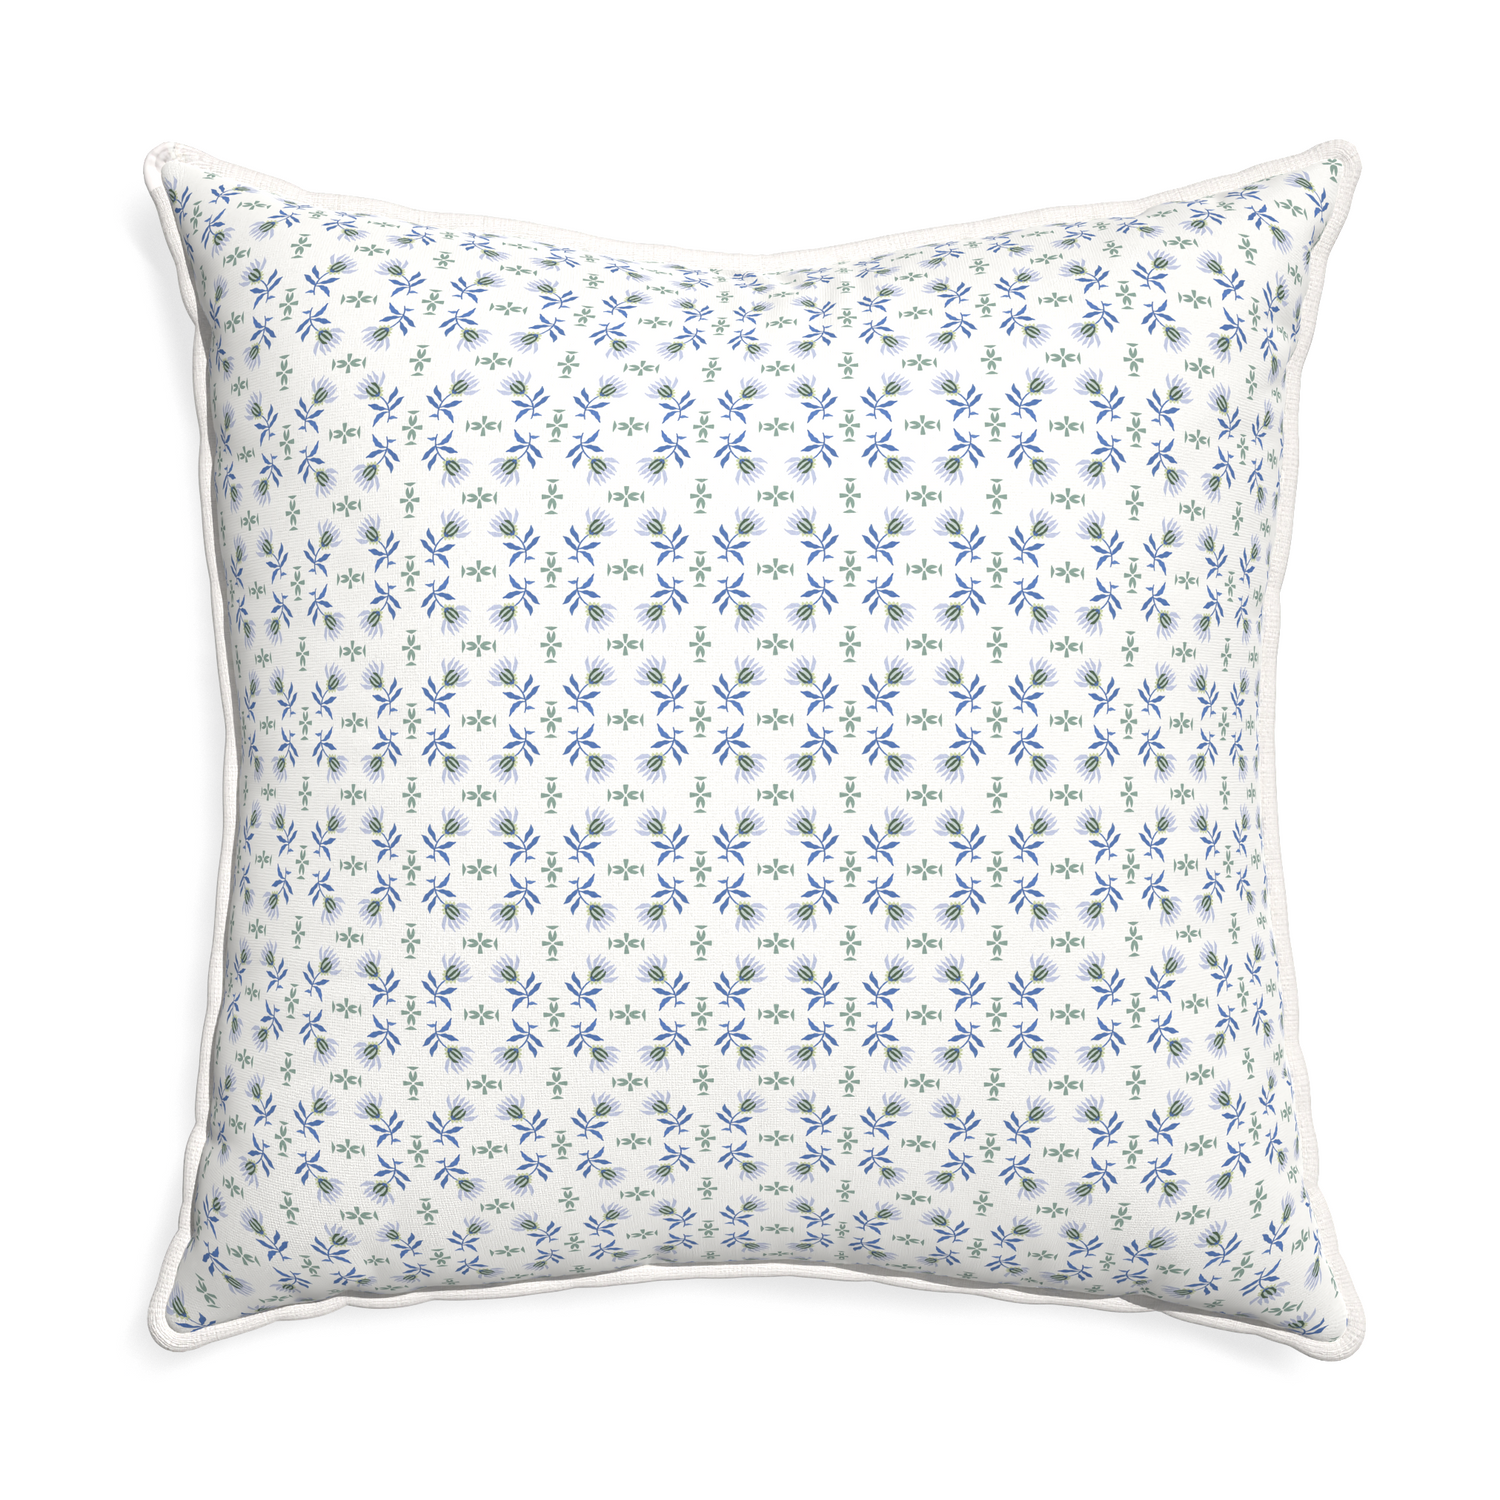 Euro-sham lee custom blue & green floralpillow with snow piping on white background